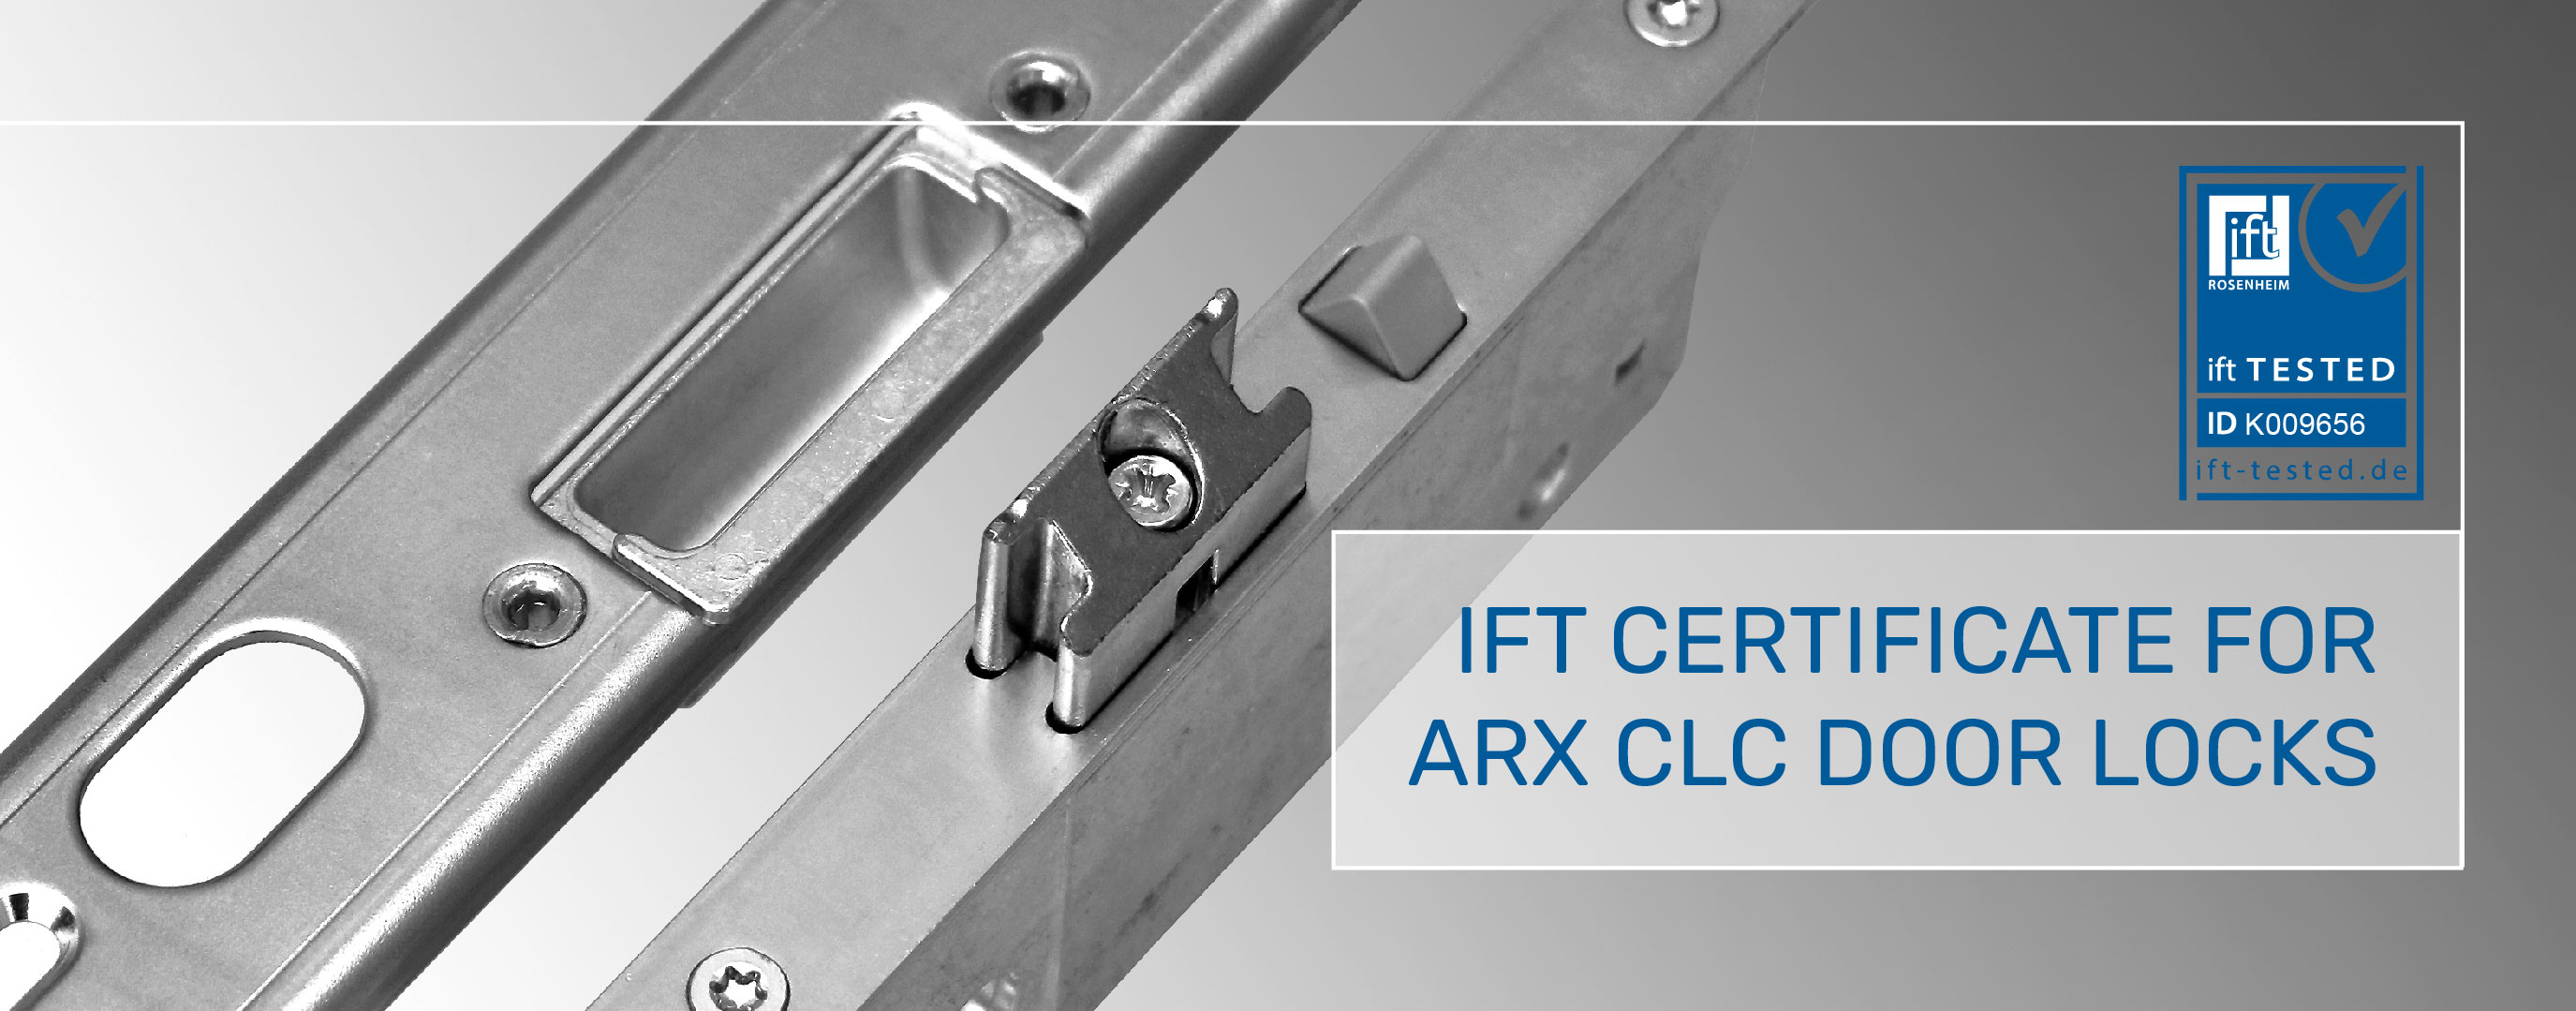 ift Certificate for ARX COMFORT Cylinder Lock